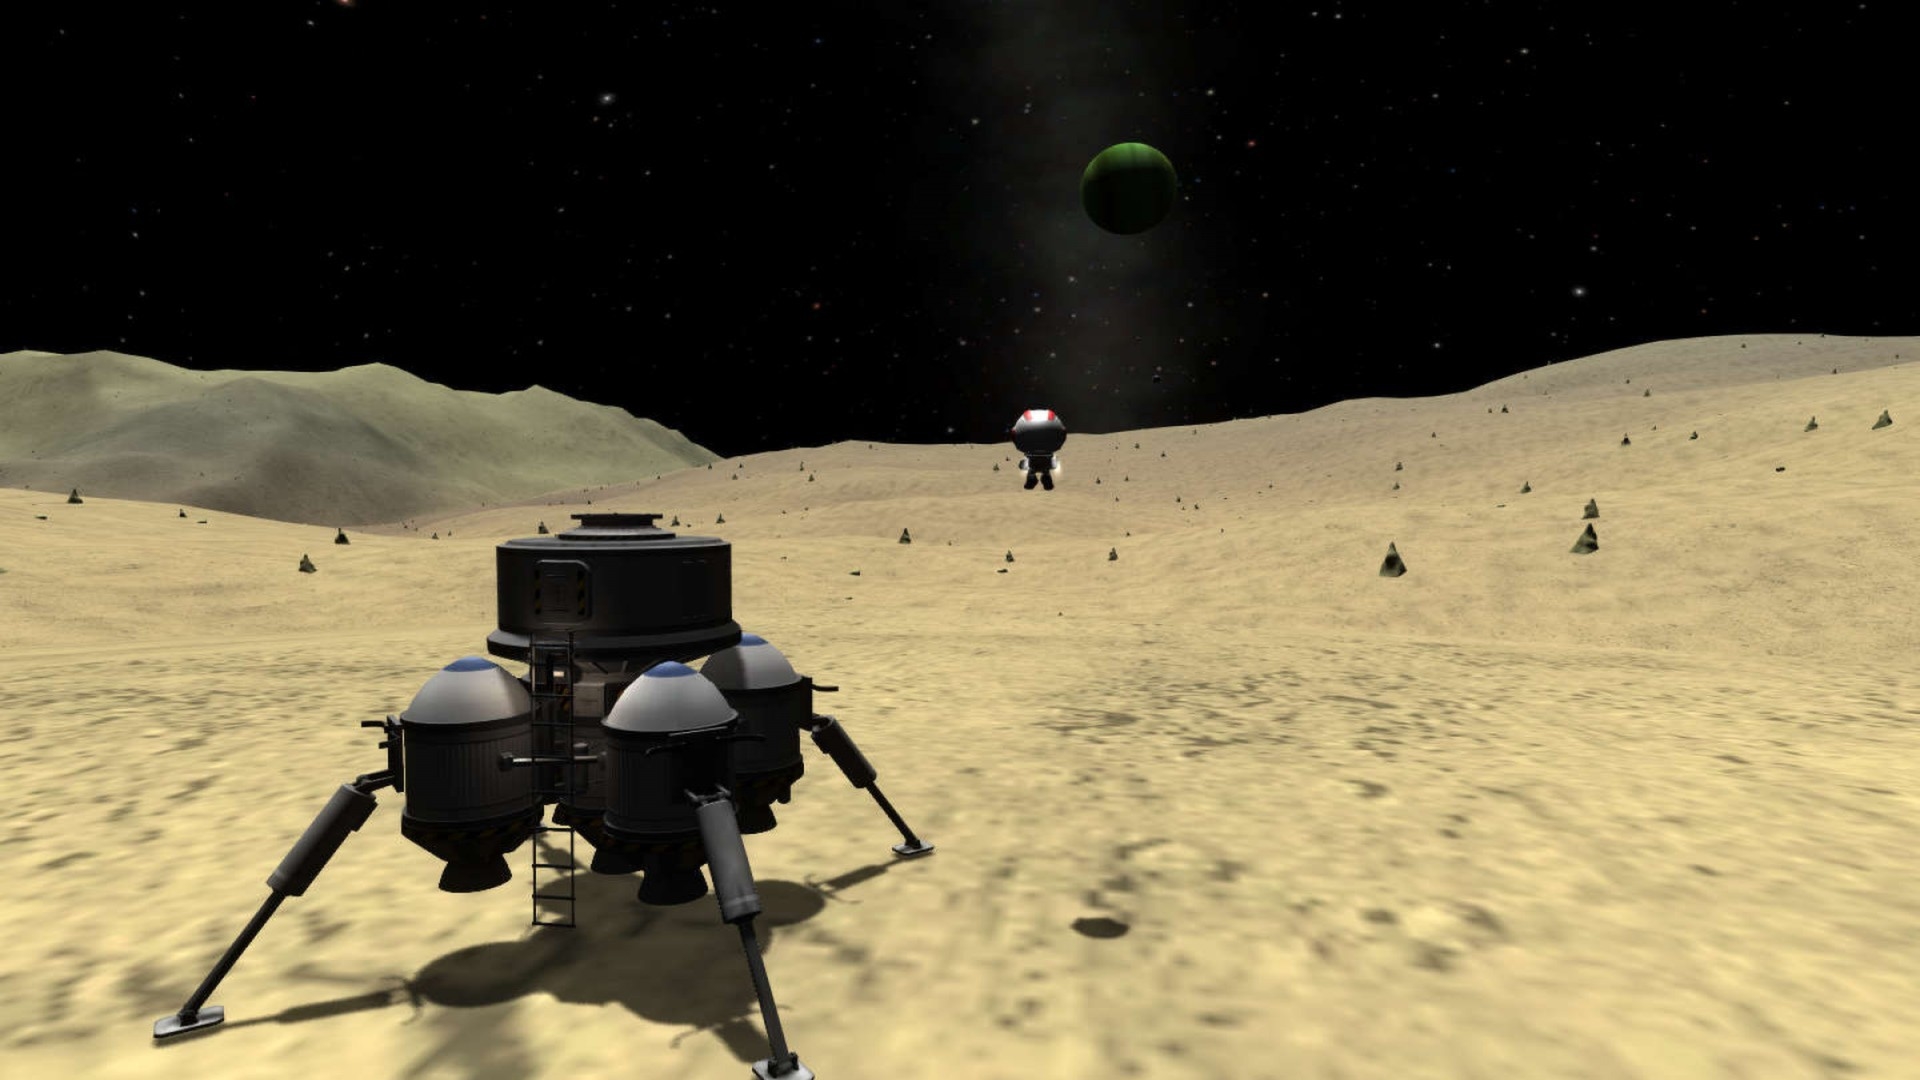 kerbal space program 2 out on consoles first reddit